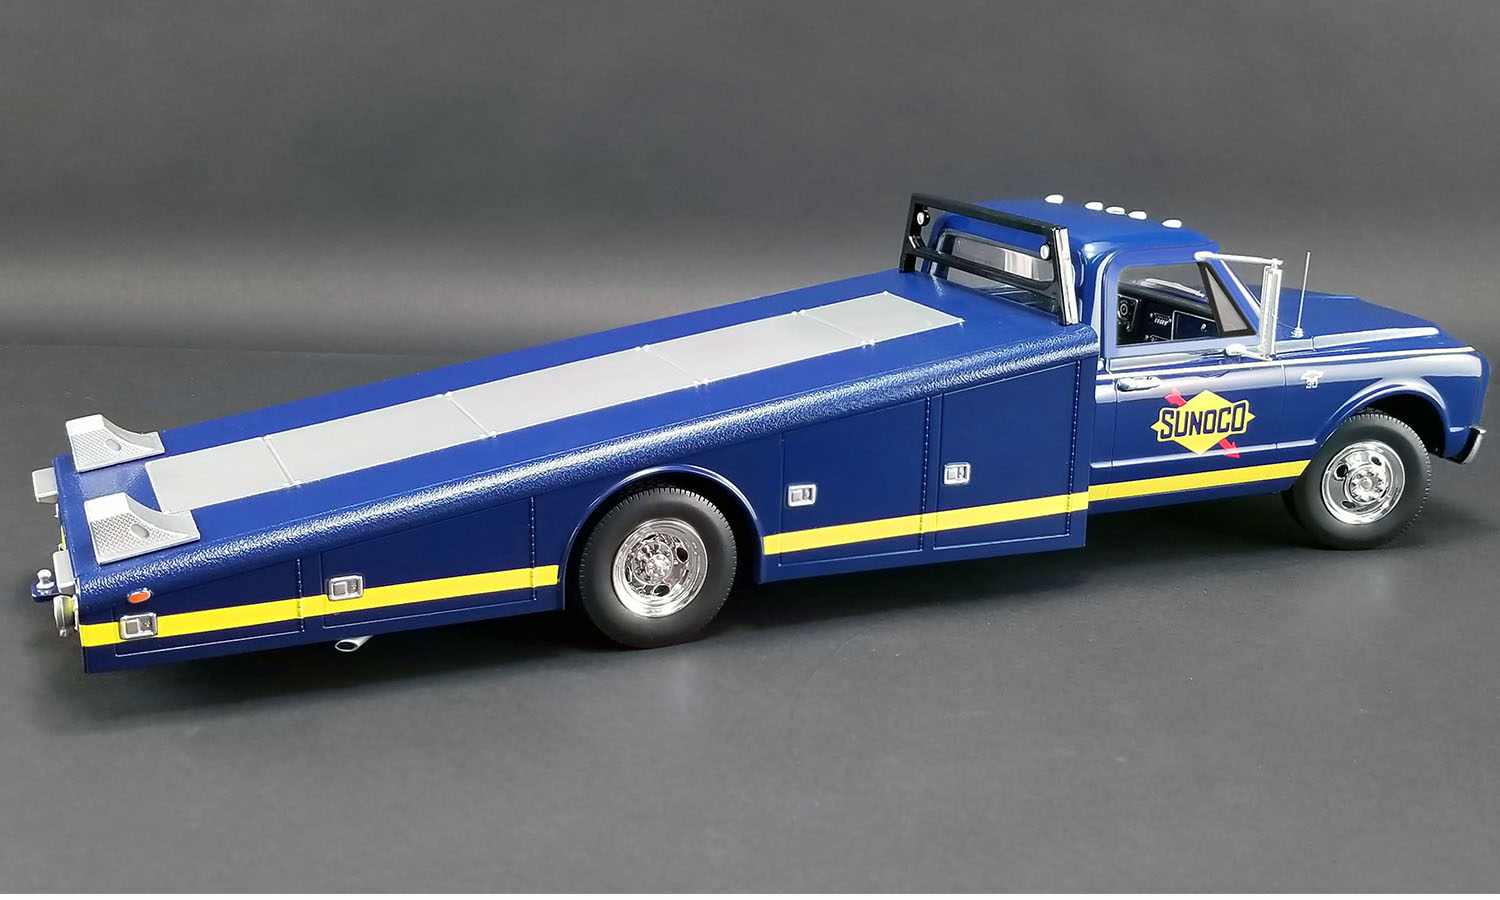 CHEVROLET C-10 TRUCK 1967 SUNOCO RACING 1:18 SCALE DIECAST BY ACME 